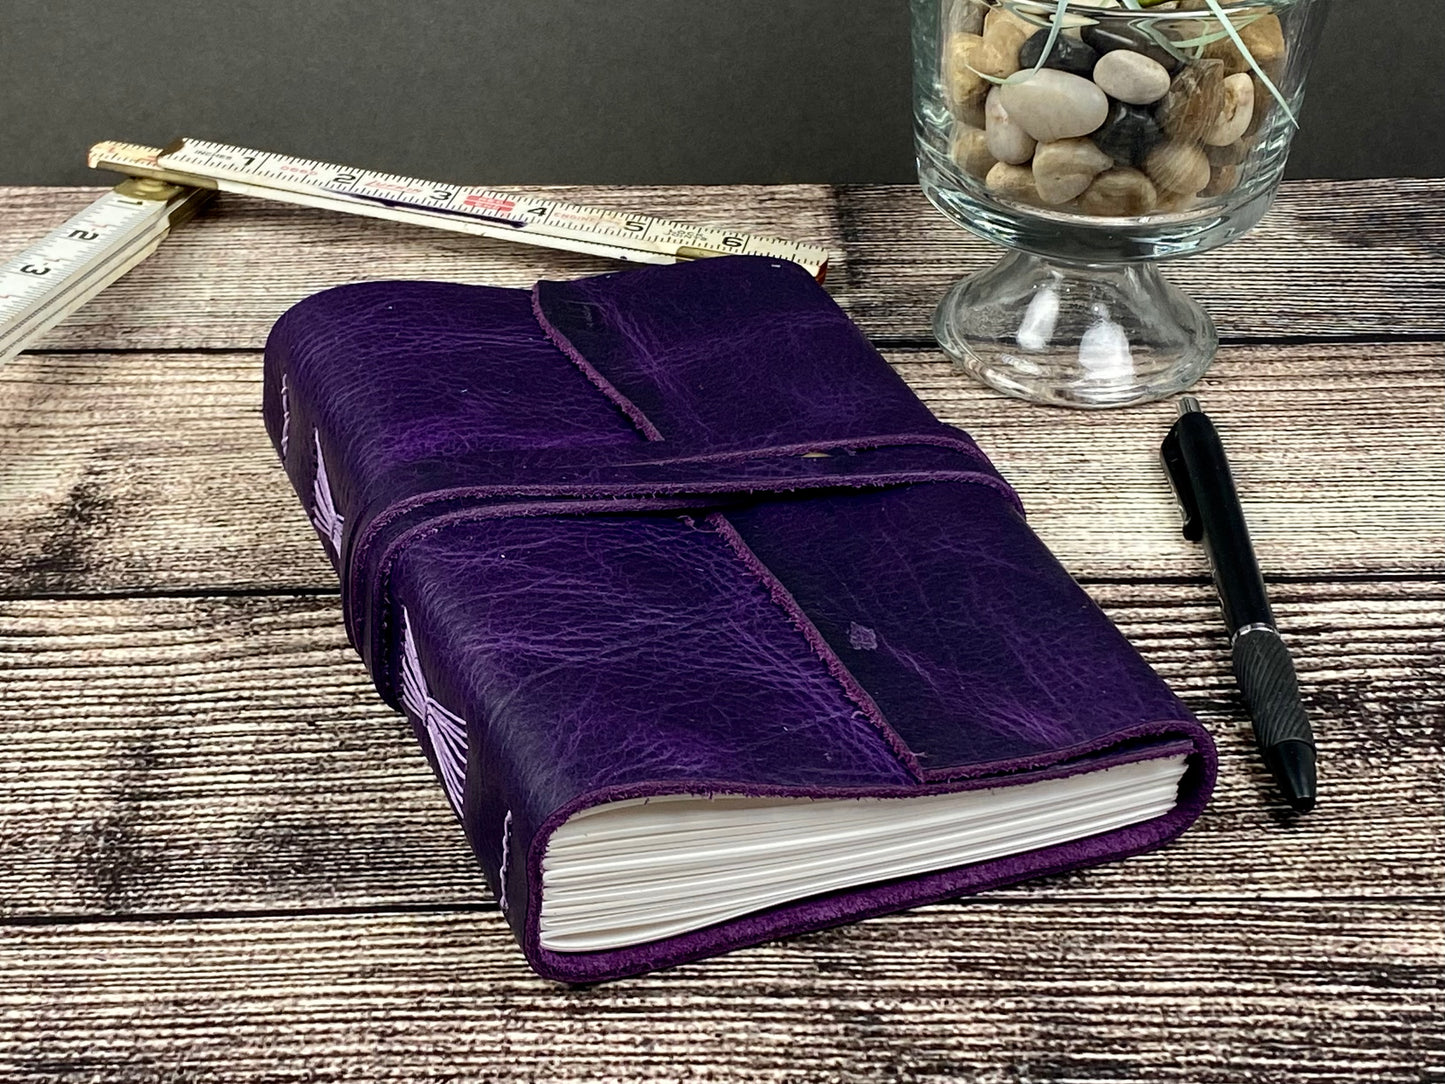 5x7 Lined Journal - Grape Bison Leather